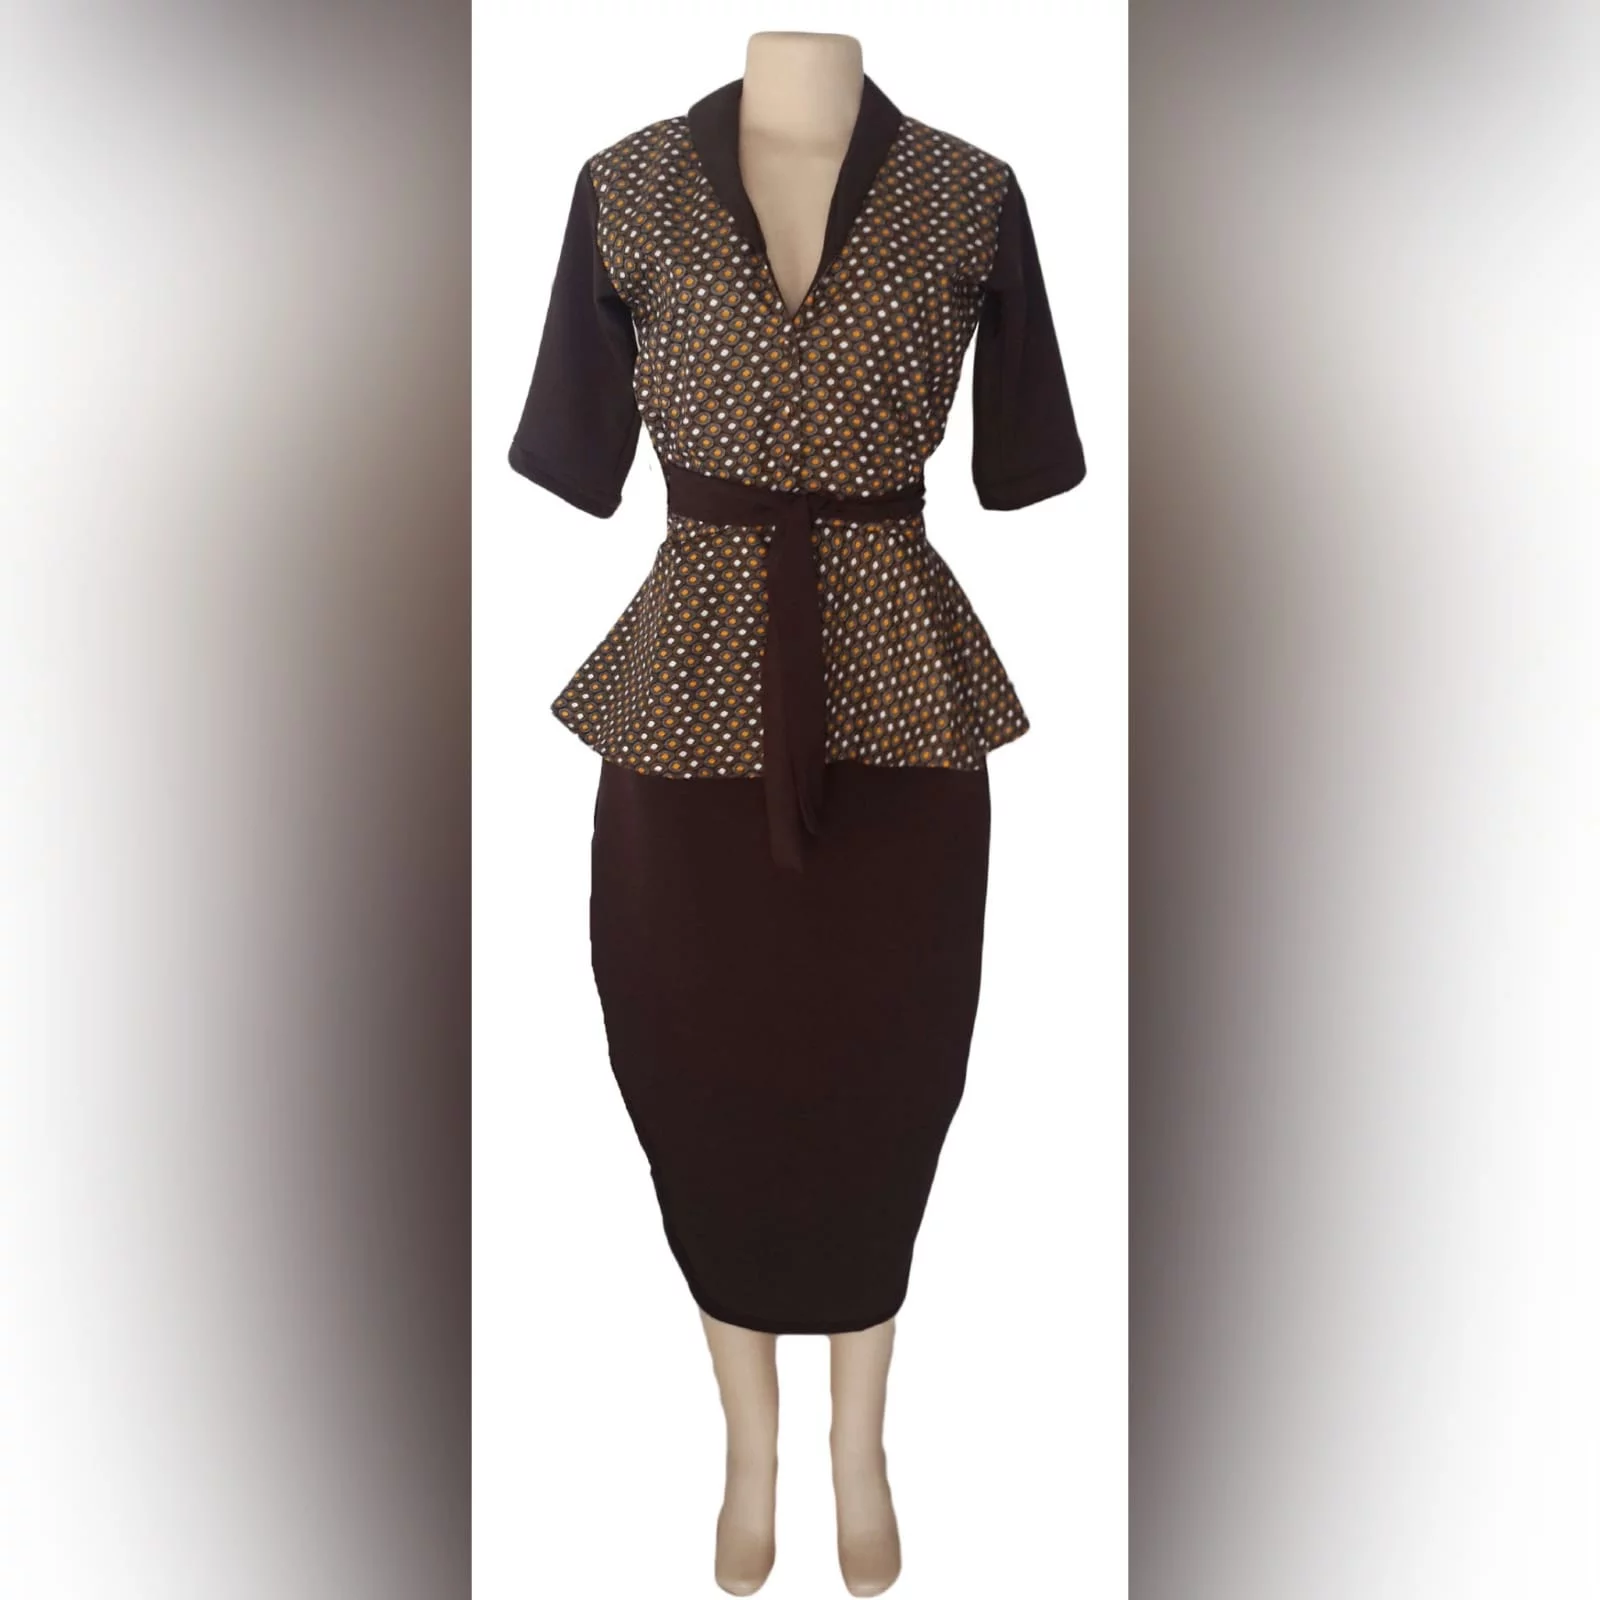 Xhosa traditional wear blouse and matching brown pencil skirt 4 a pencil skirt below the knee with a back slit. With a xhosa traditional blouse. Blouse with sleeves, collar and belt in brown matching the skirt.